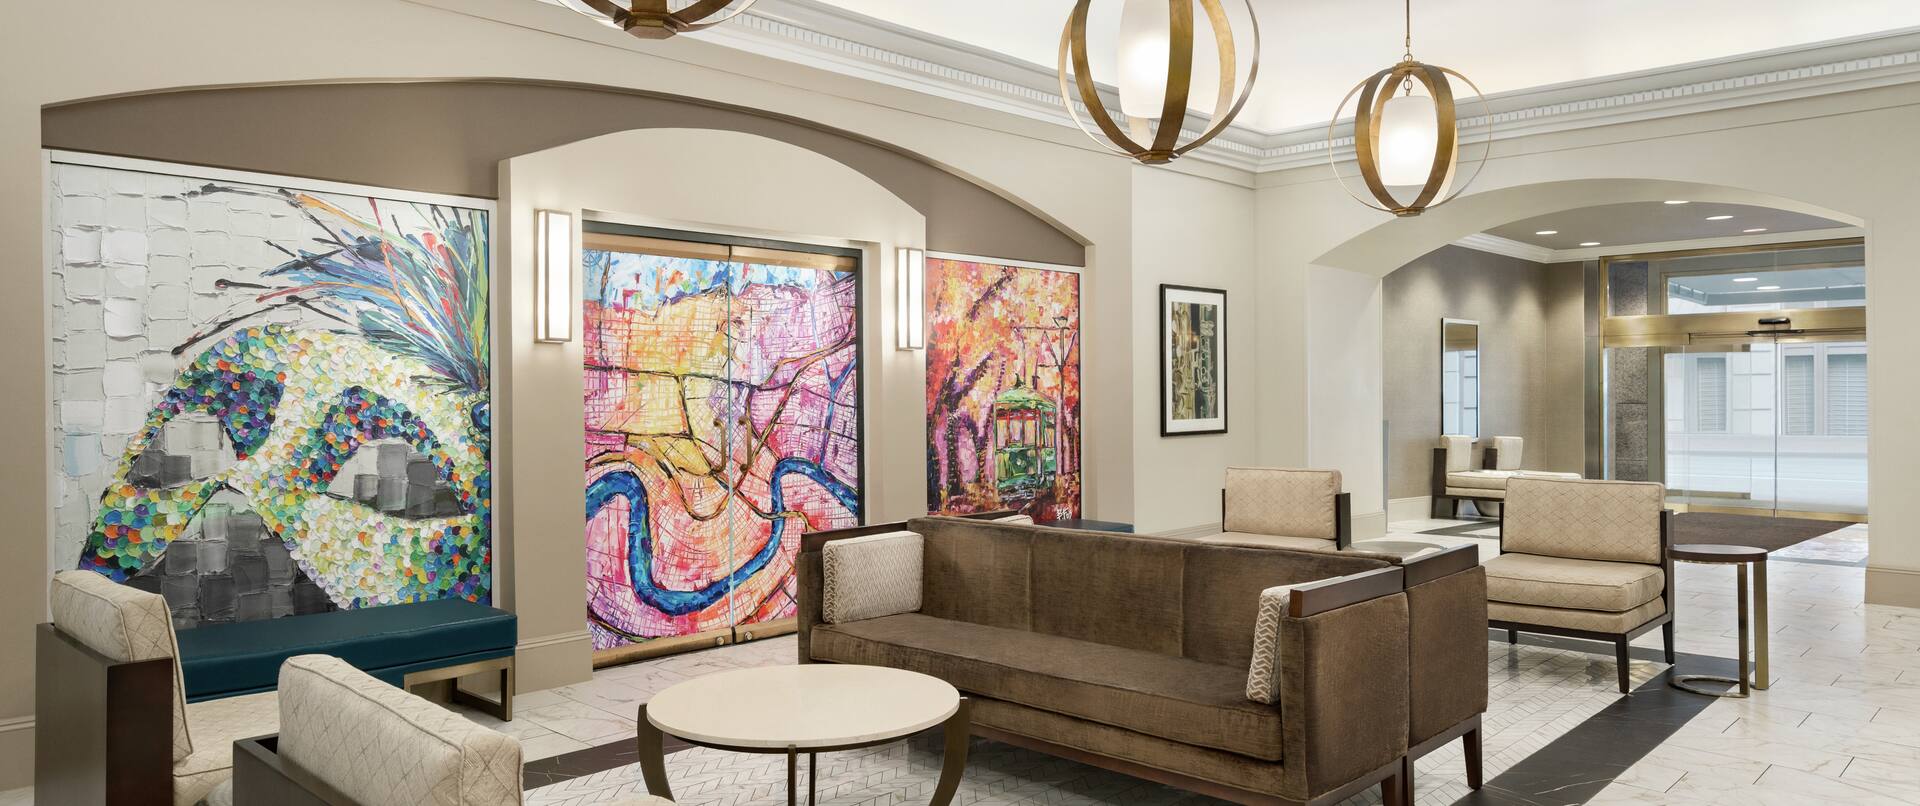 Spacious hotel lobby featuring stylish design, eye-catching mural, and comfortable seating.